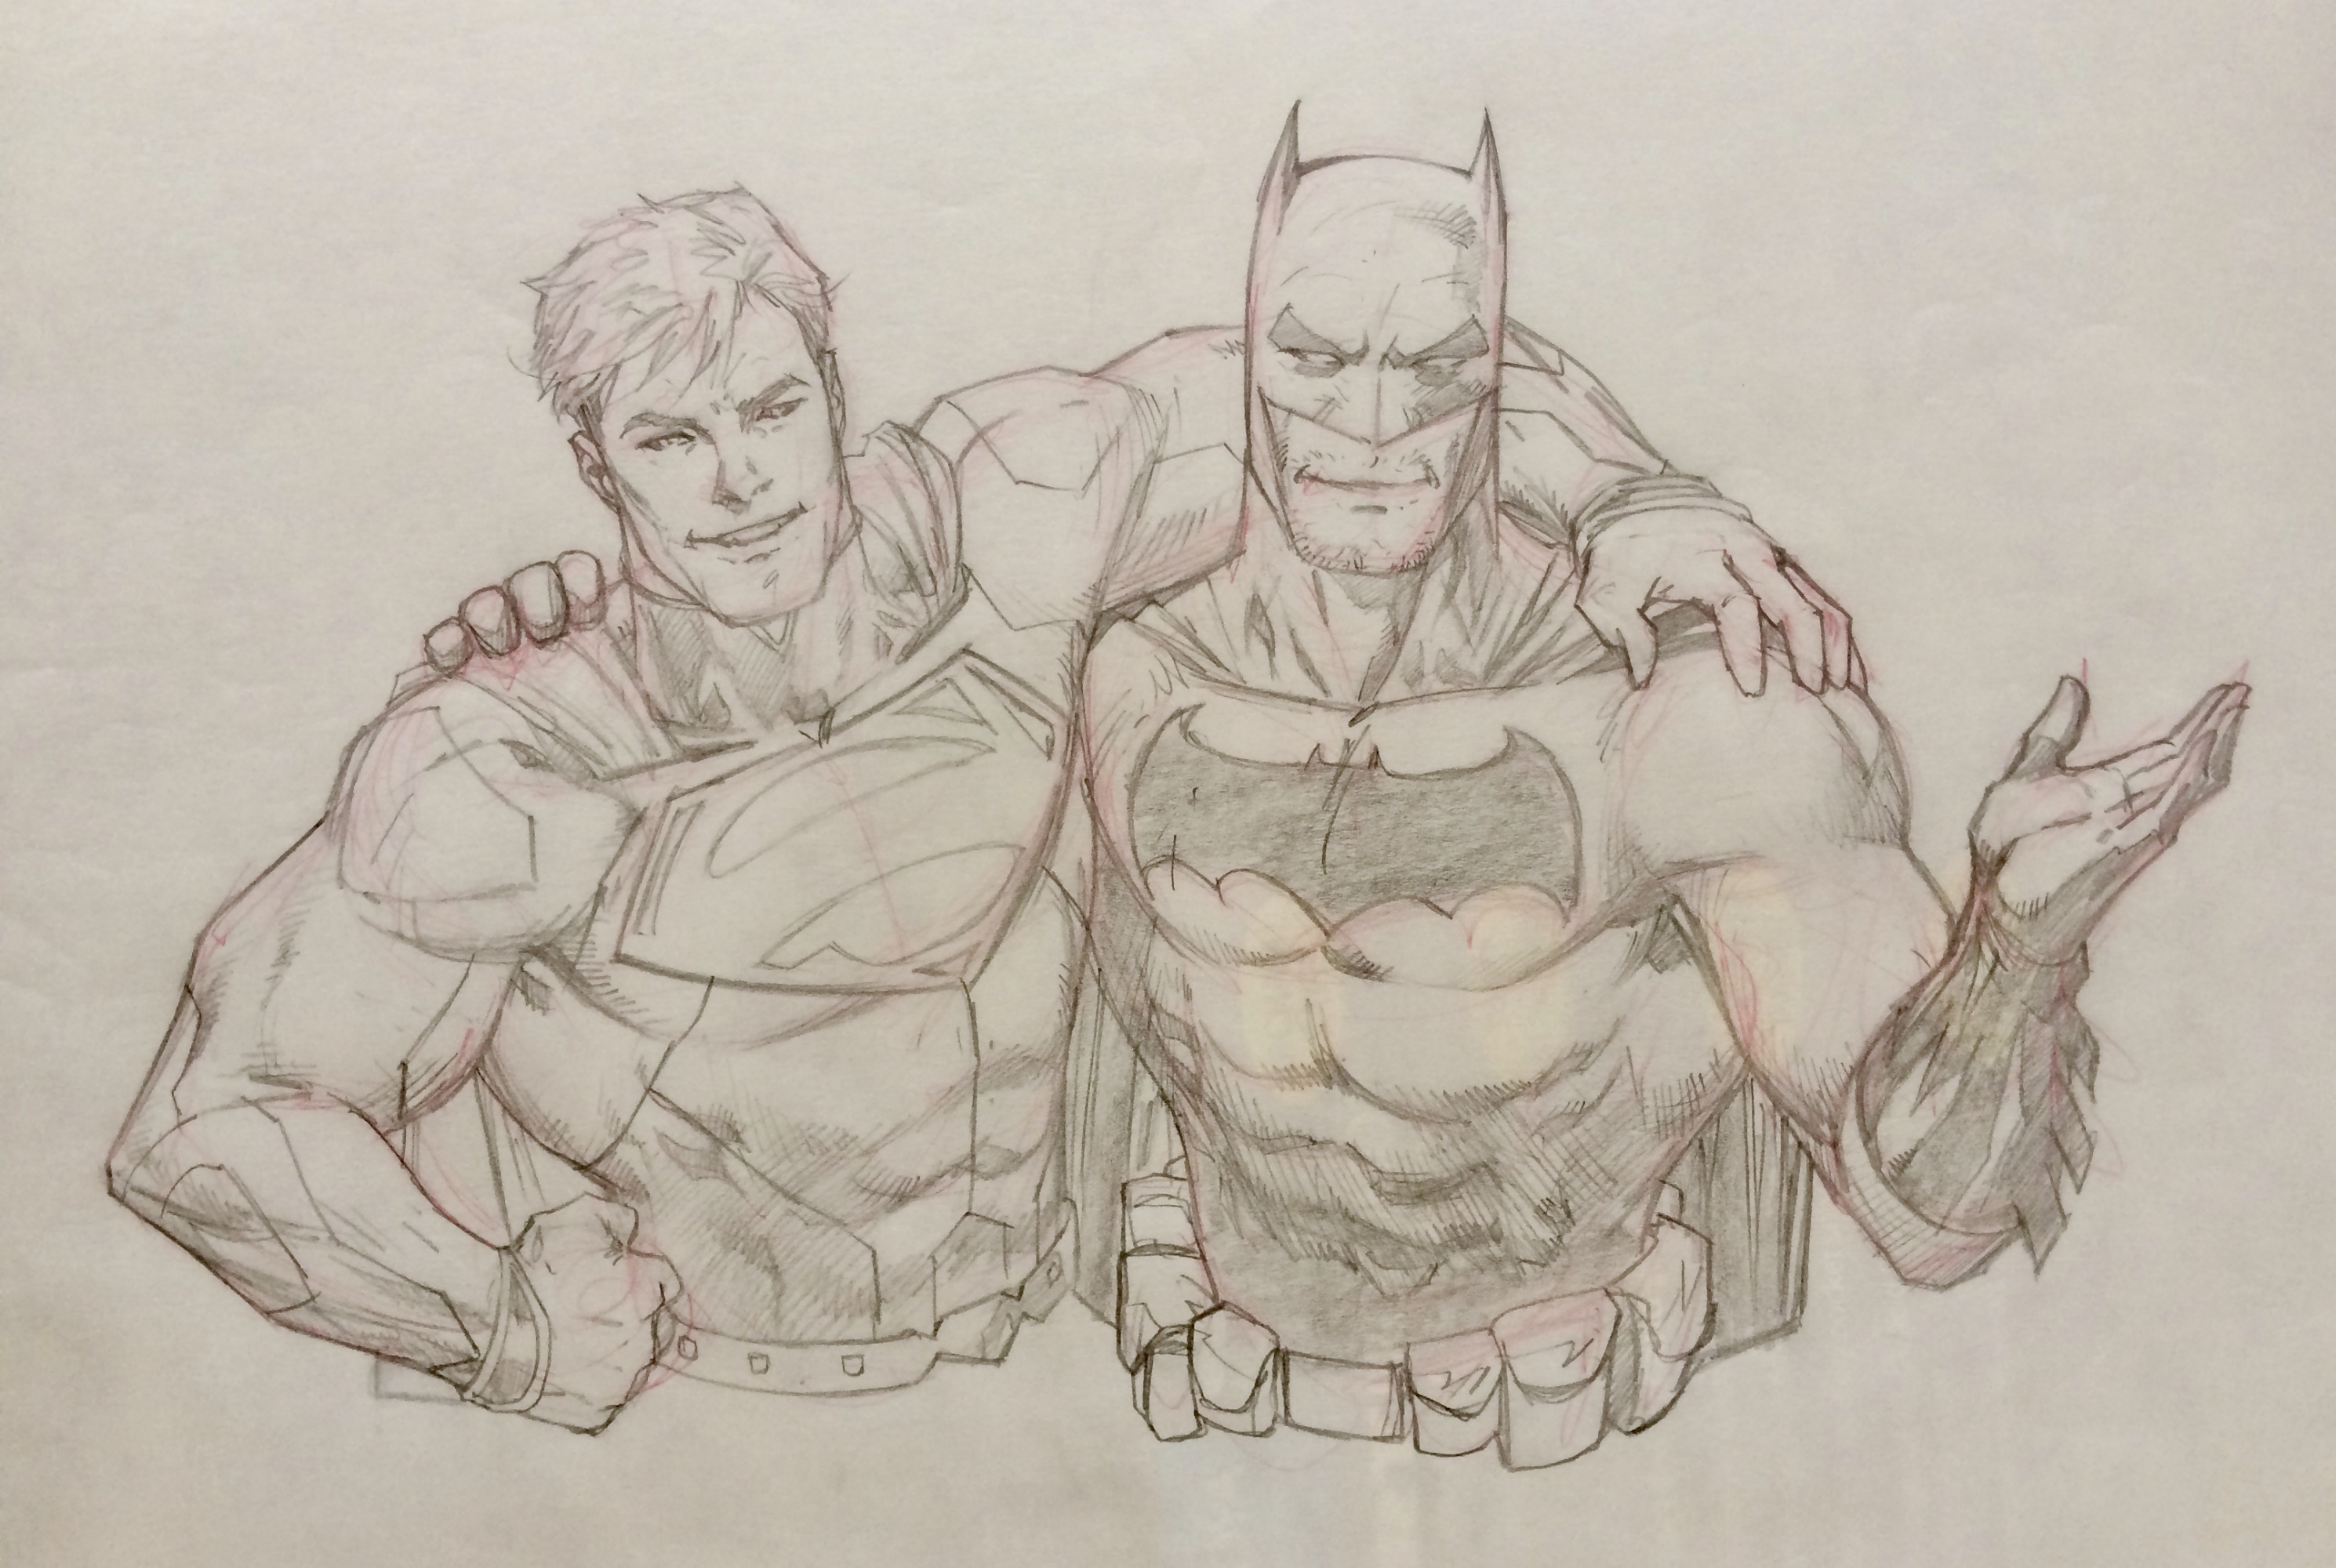 The World's Finest Heroes (Superman & Batman) Online DC Emoji Art by Ryan  Benjamin, in Timothy Finney's Miscellaneous Published & Unpublished Art  Comic Art Gallery Room